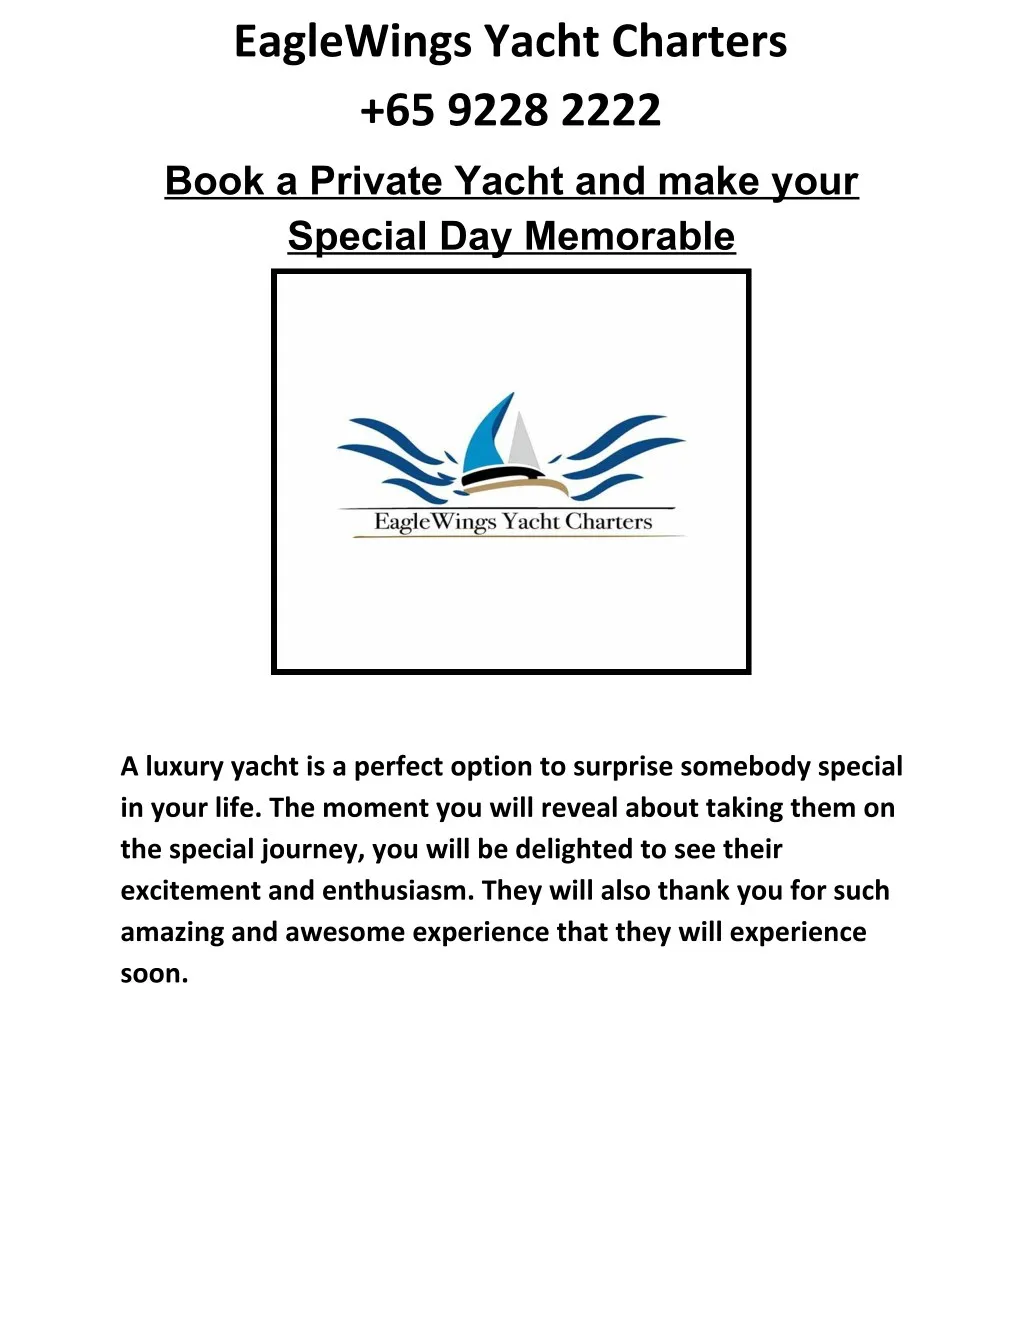 eaglewings yacht charters 65 9228 2222